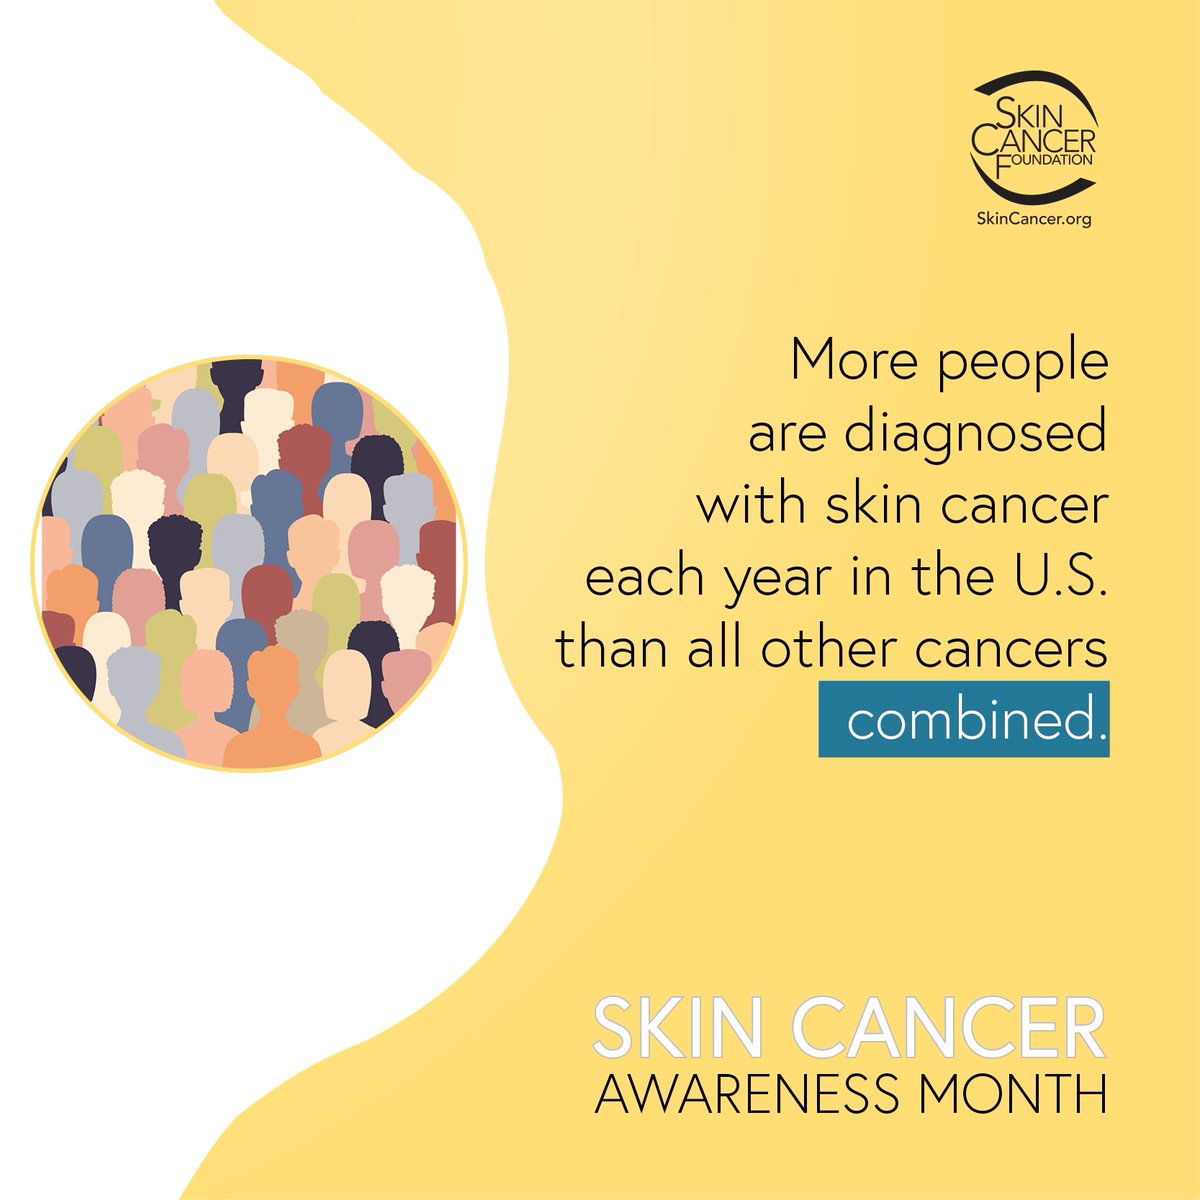 Two years ago today, on Cinco de Mayo 2021, I was diagnosed with #melanoma. Coincidentally (maybe ironically), May is also Skin Cancer Awareness month. So here’s my annual awareness tweet. 🧵 1/9

#ShareTheFacts #ThisIsSkinCancer #Melanoma #SkinCancerAwareness 

@SkinCancerOrg